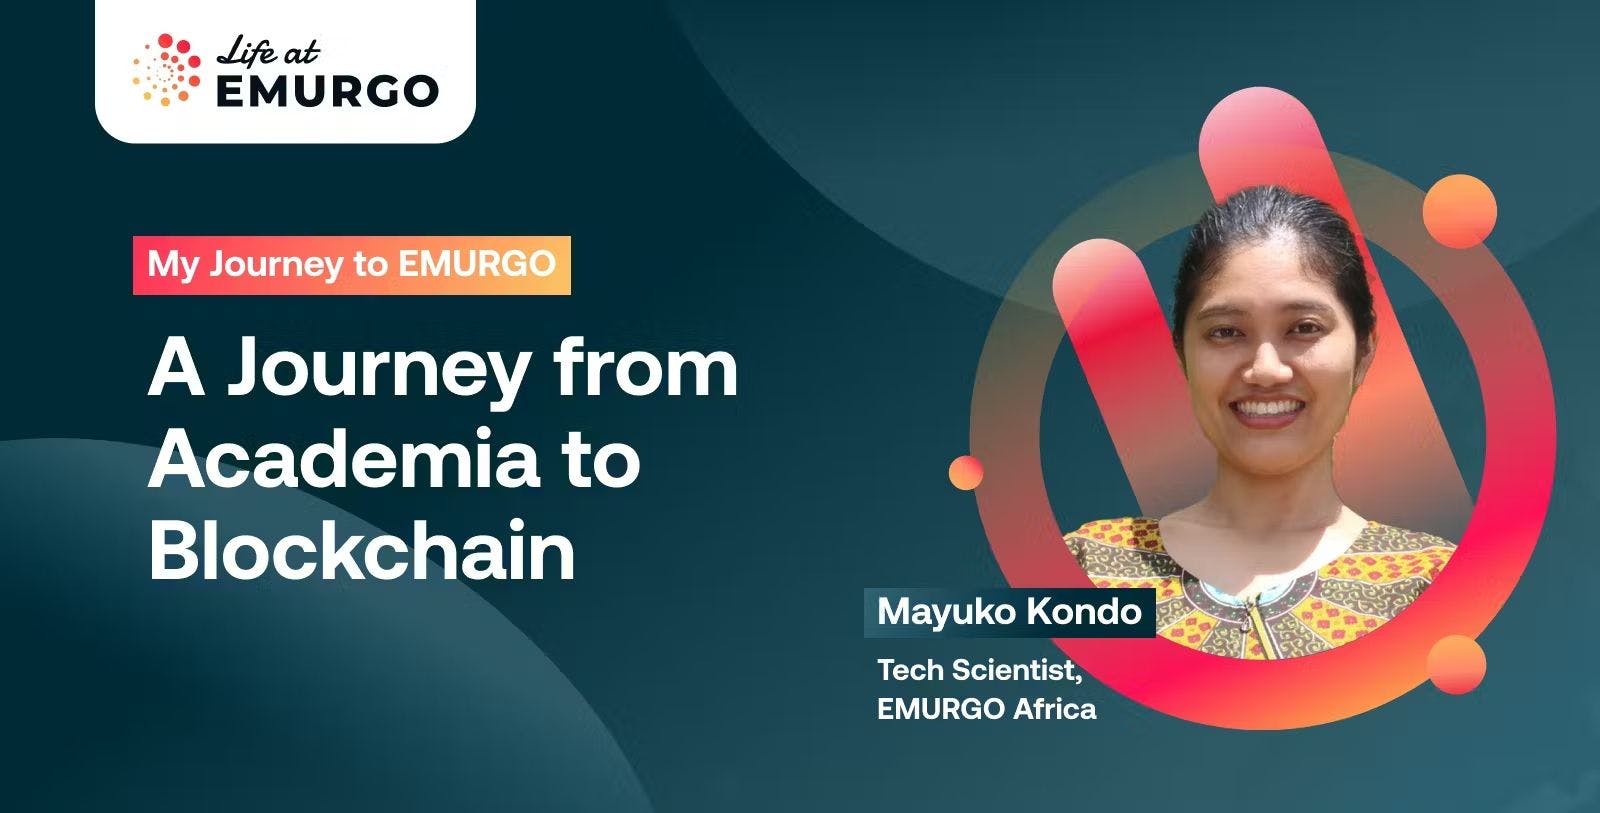 Life at EMURGO: A Journey from Academia to Blockchain